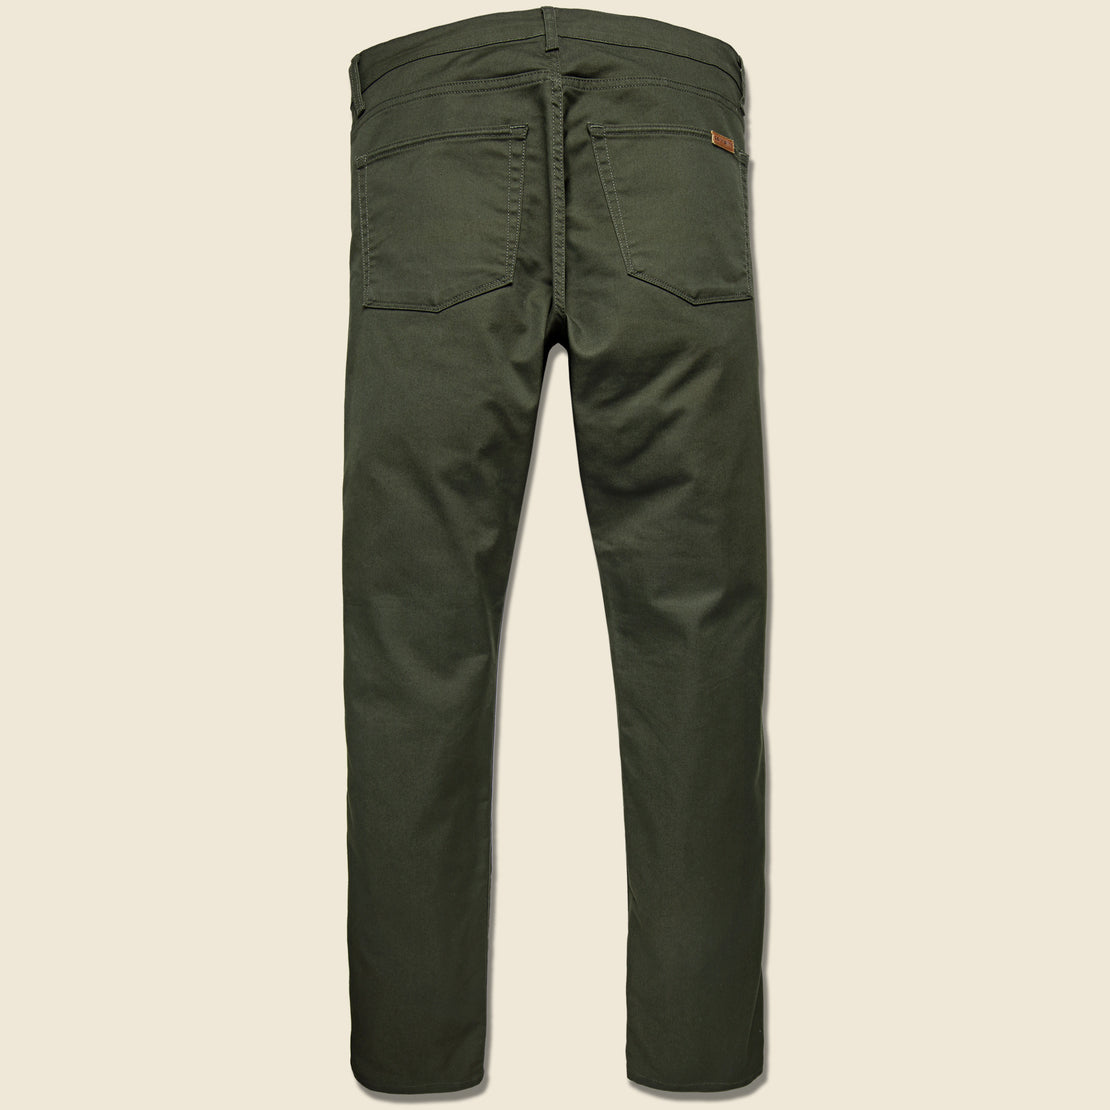 Vicious Pant - Cypress - Carhartt WIP - STAG Provisions - Pants - Twill